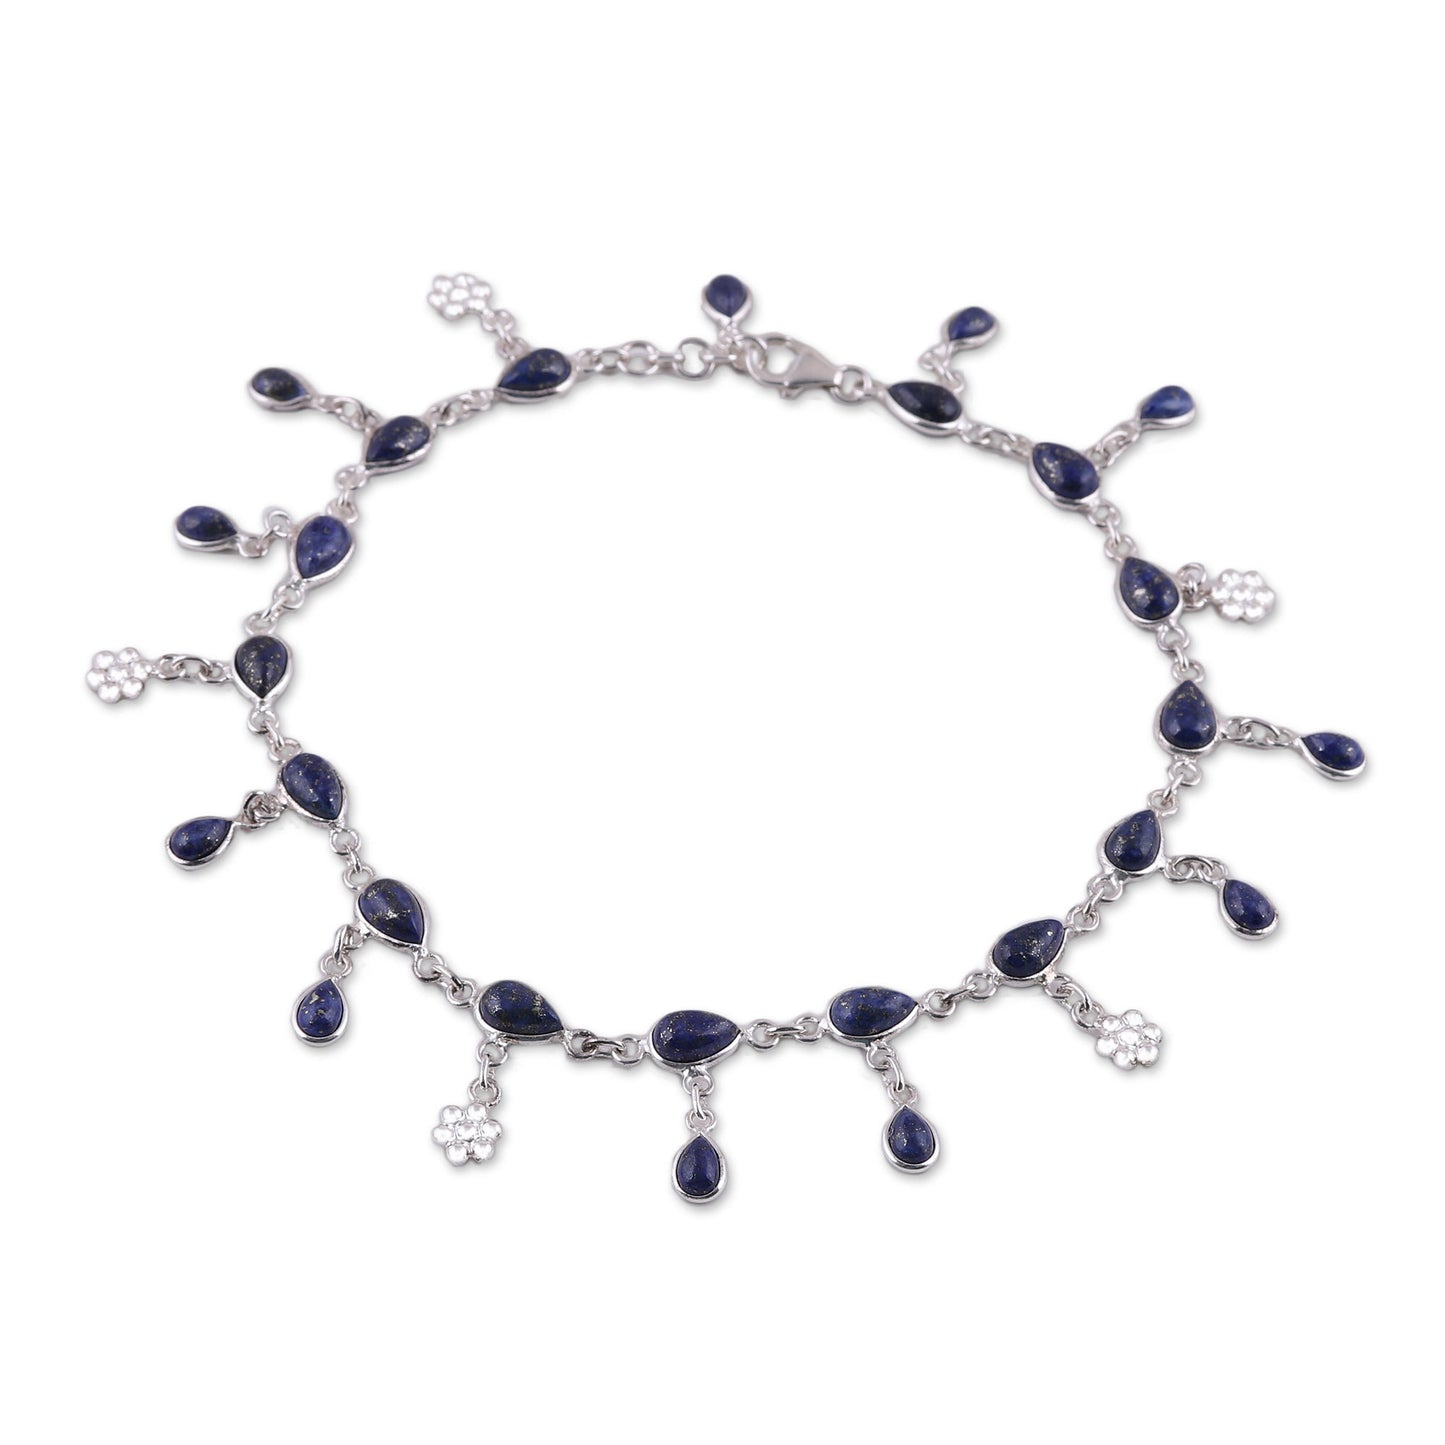 Tidal Luster Handmade Lapis Lazuli and Sterling Silver Anklet from India